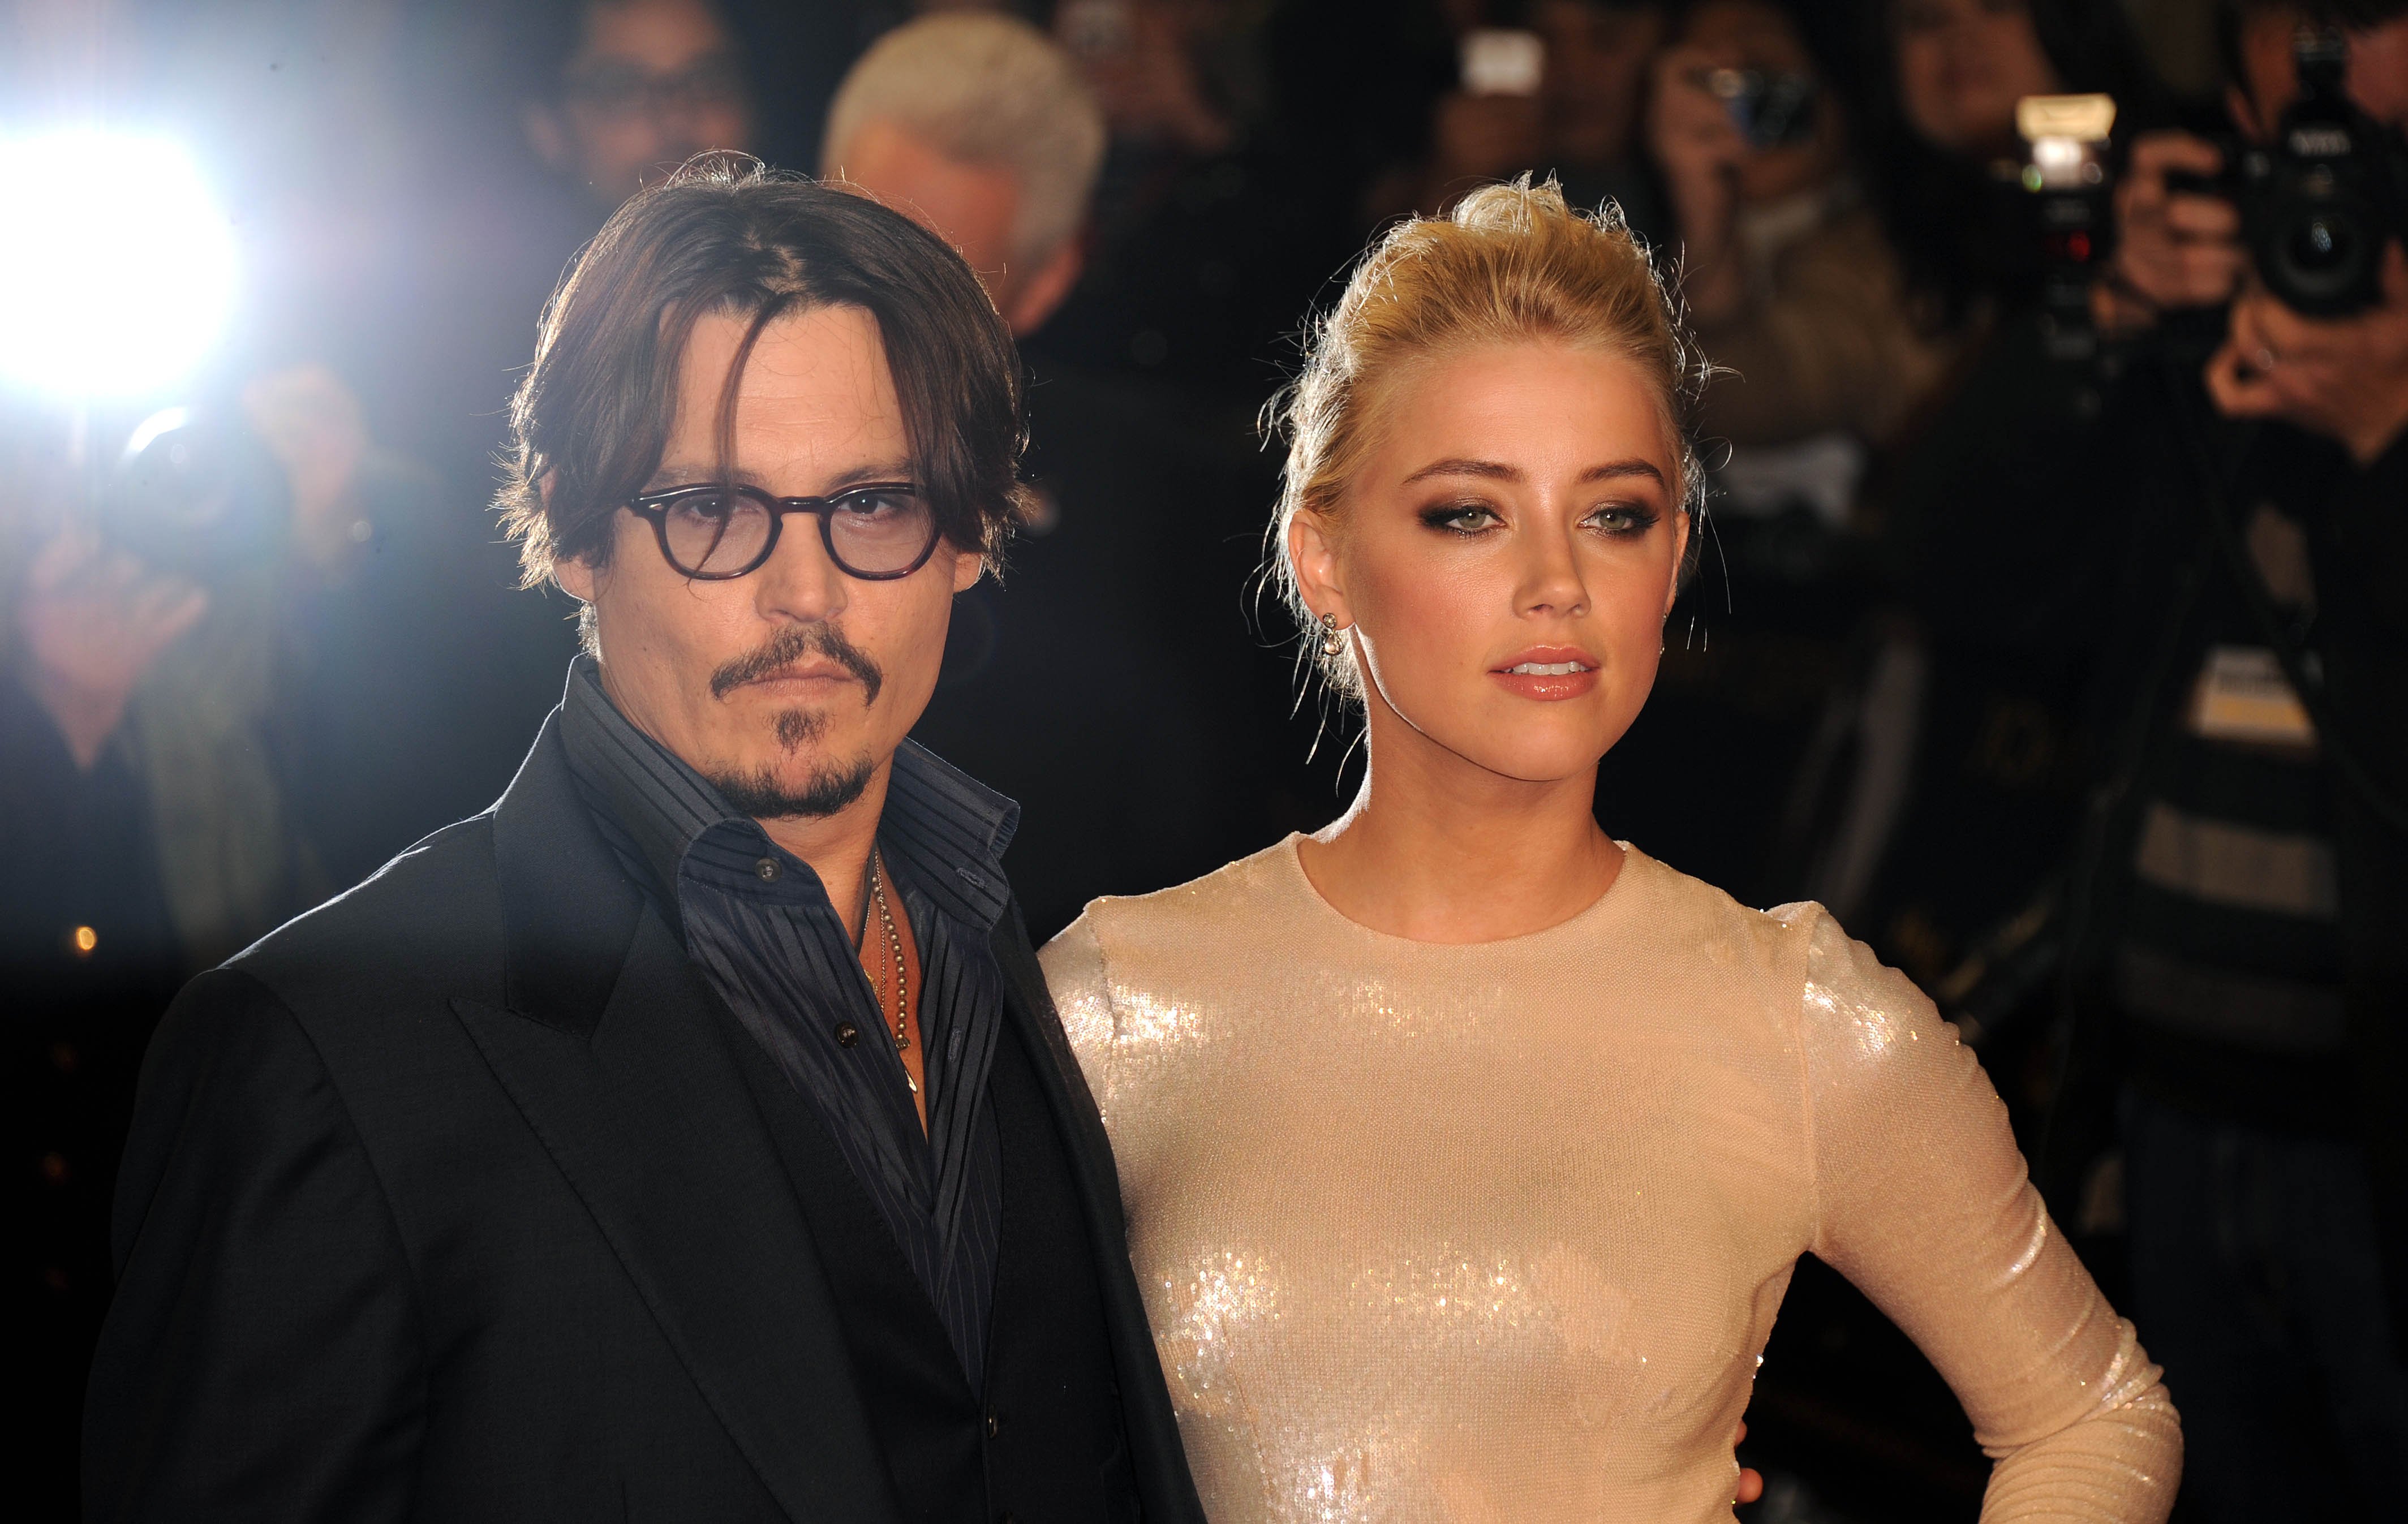 Johnny Depp and Amber Heard at the UK Premiere of "The Rum Diary" on November 3, 2011 | Source: Getty Images